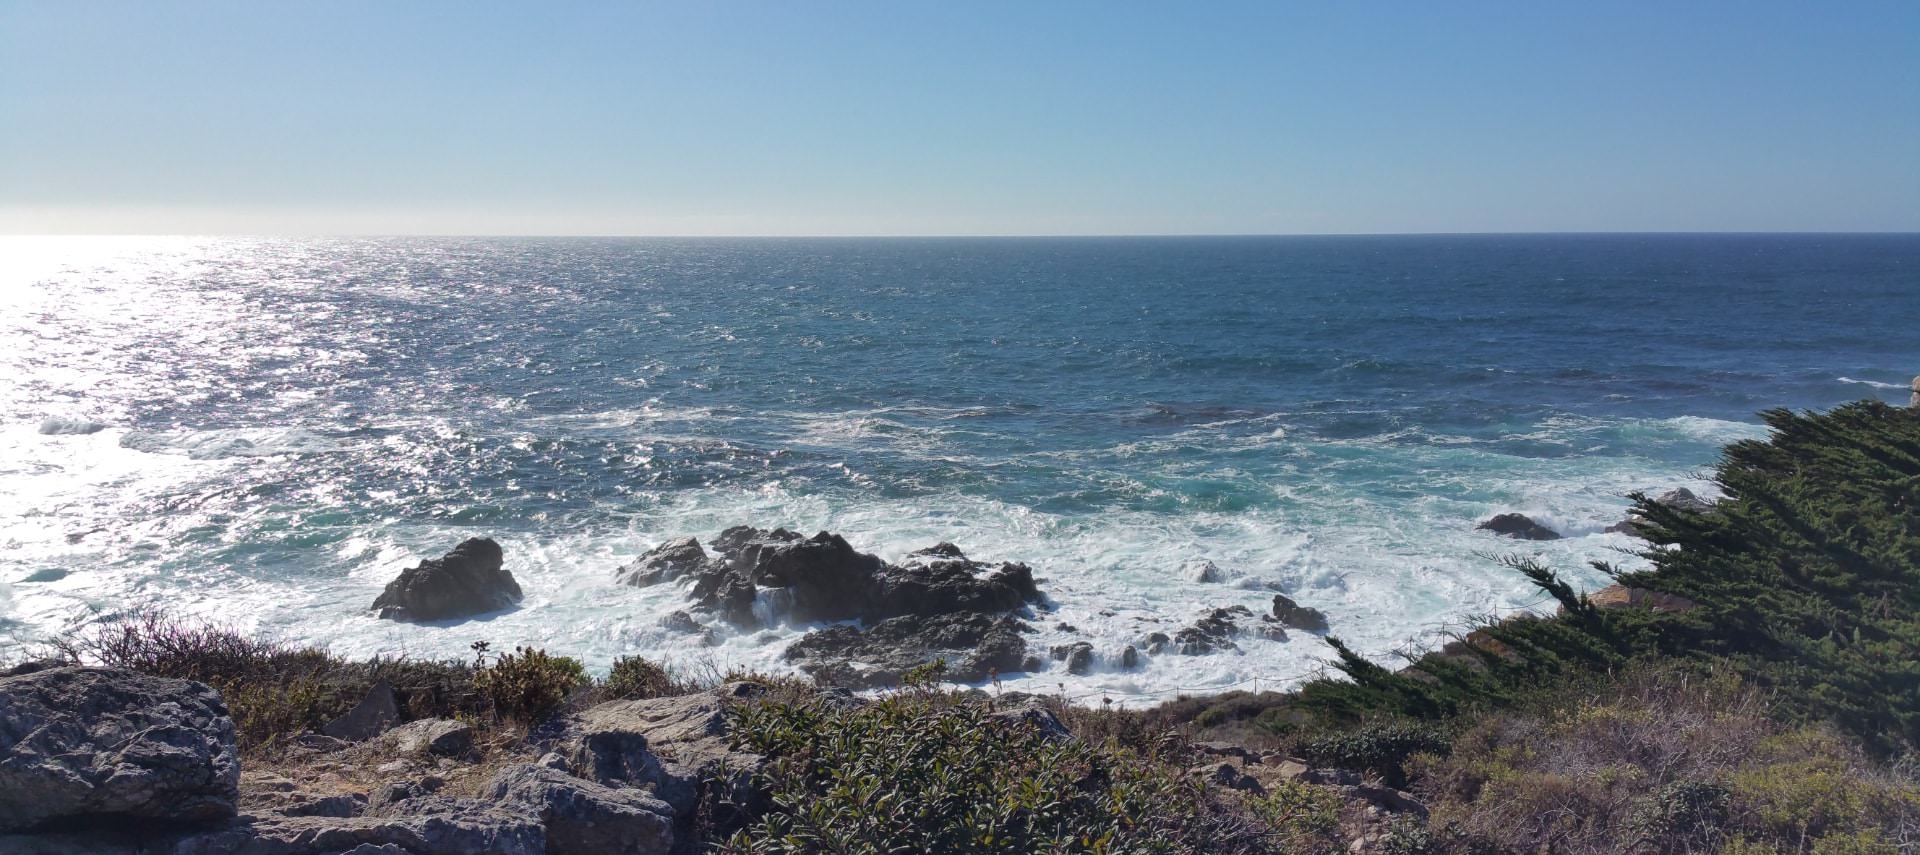 View of the ocean with waves crashing on rocks next to cliff with rocks and grasses